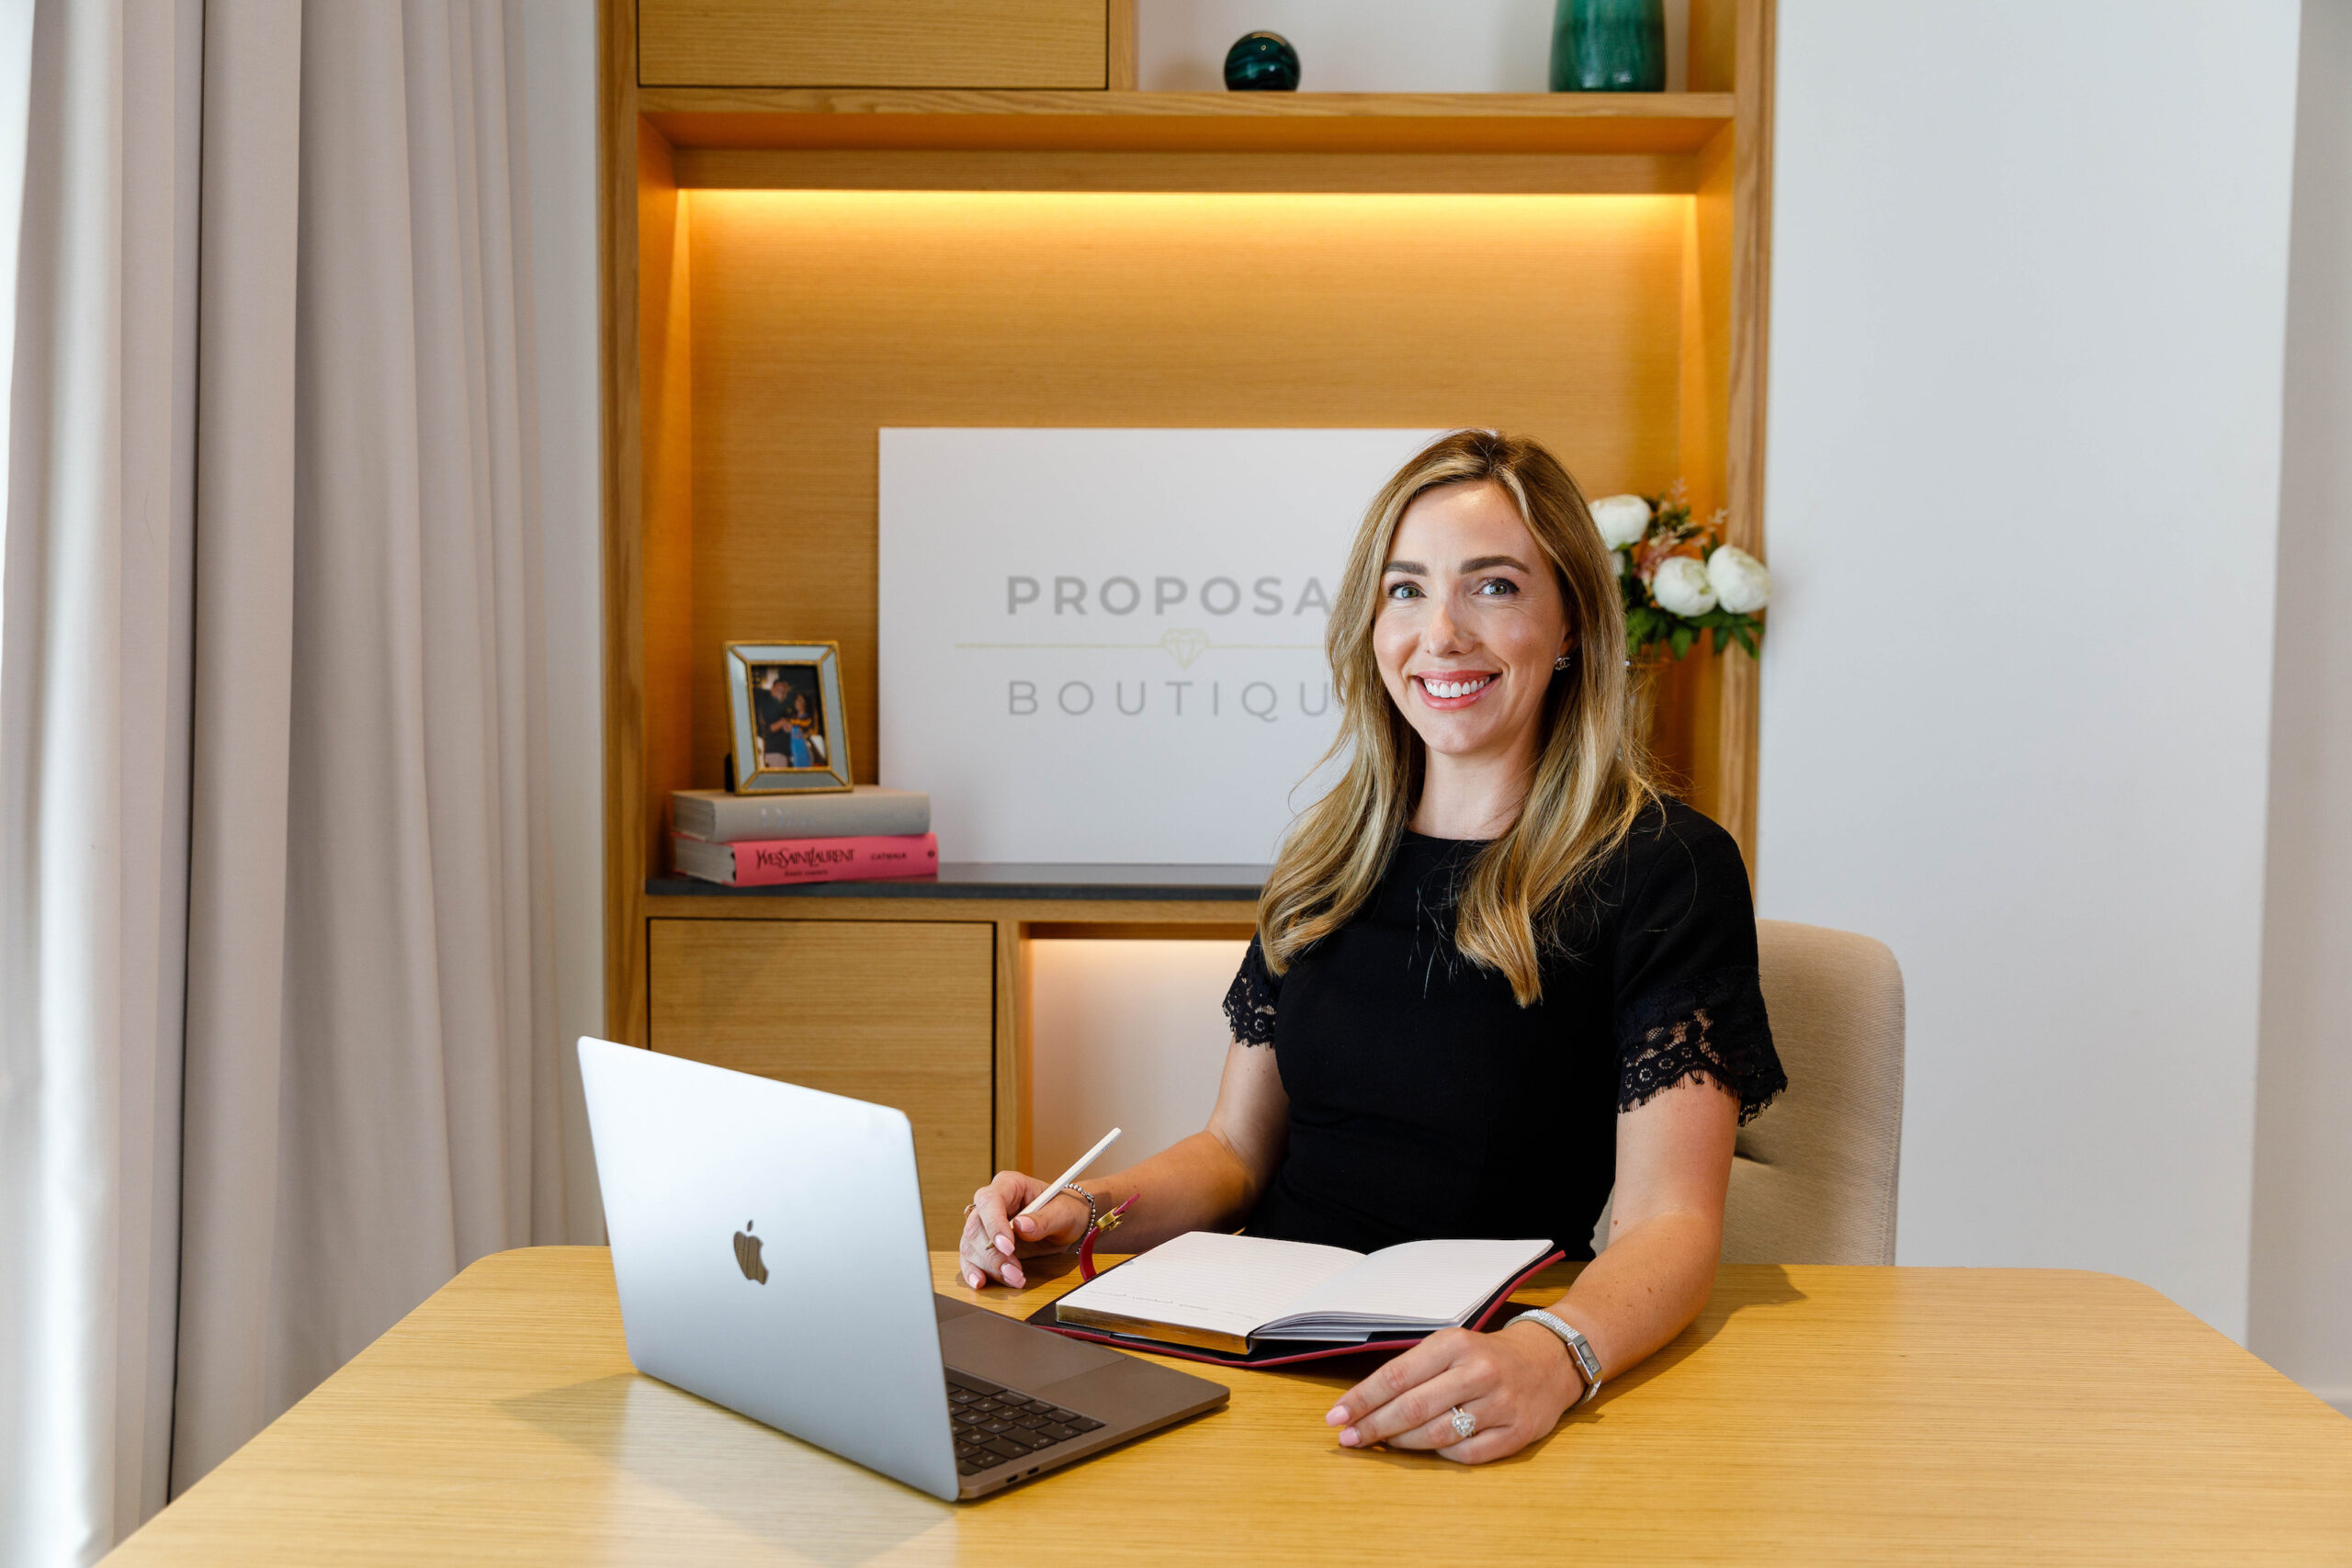  Proposal Boutique sees a 374% profit increase as demand for luxurious wedding proposals in the Emirate increases